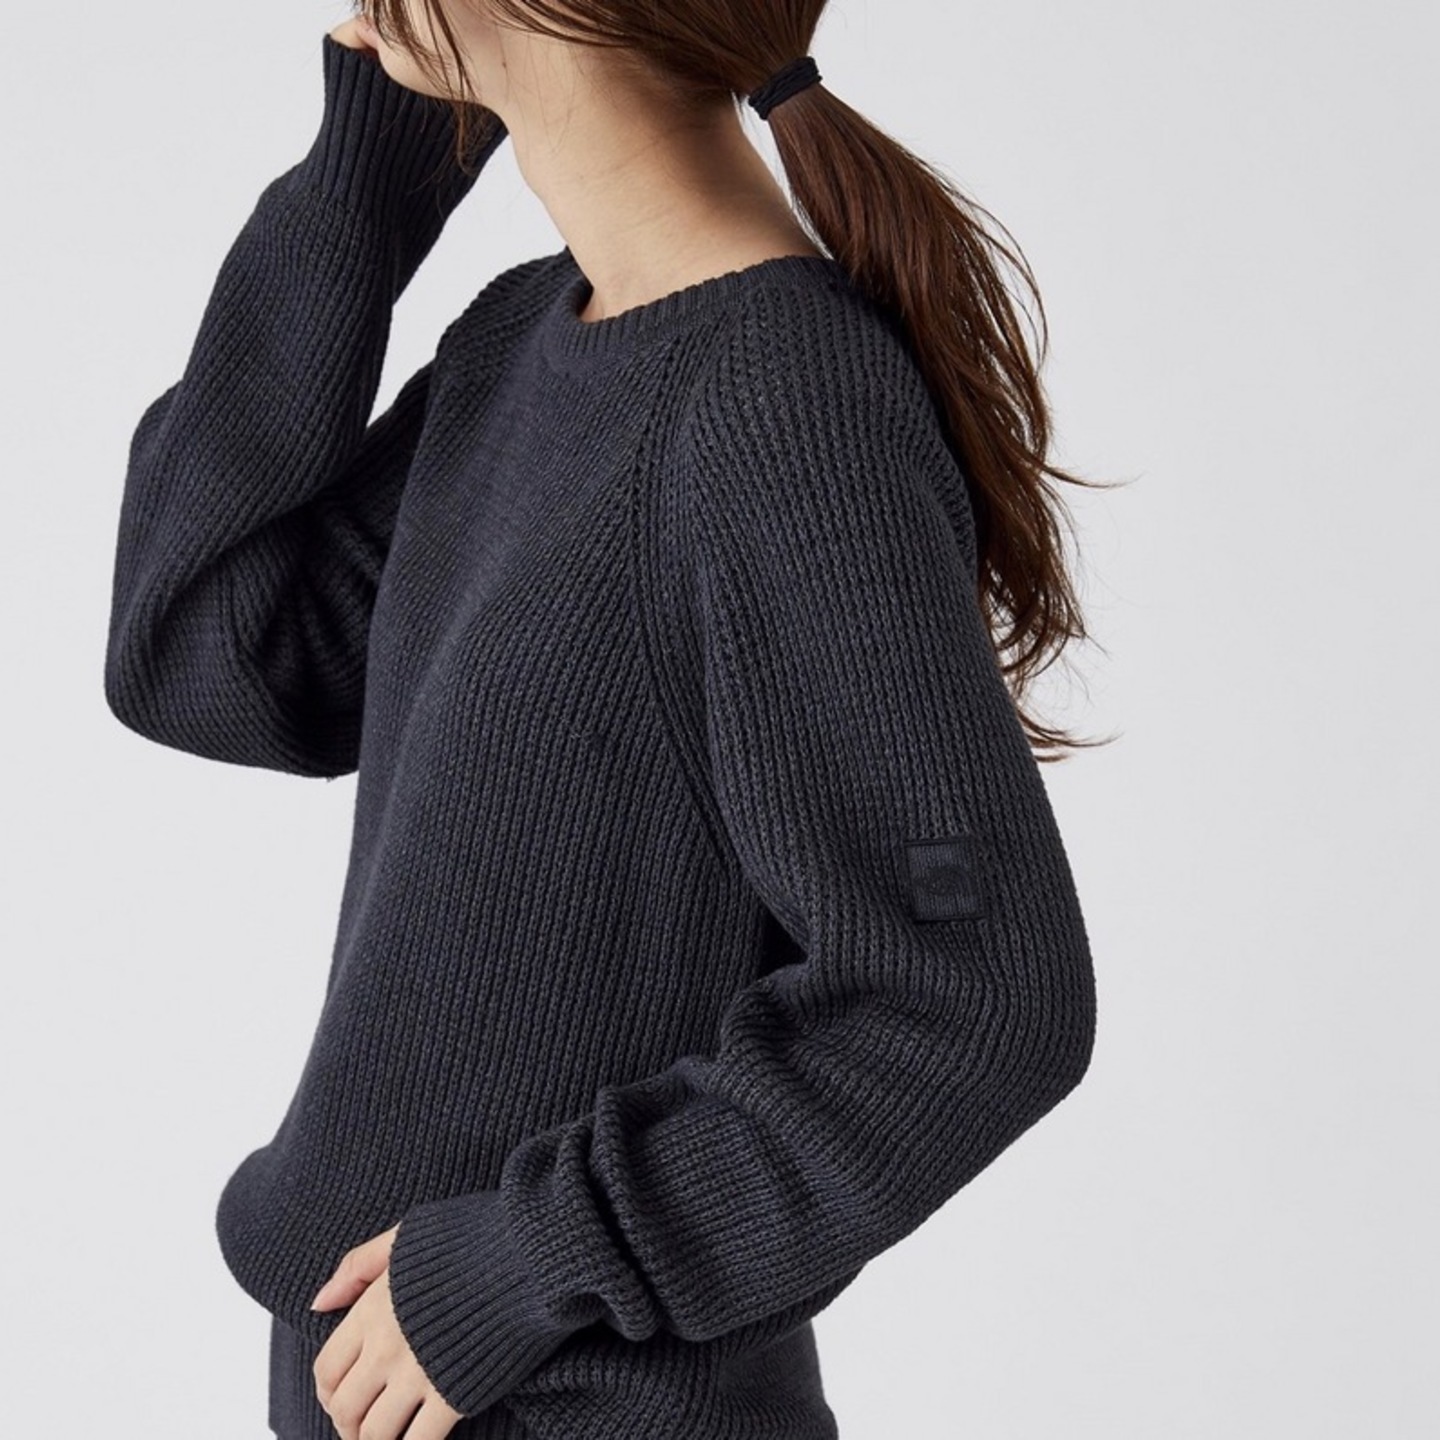 The North Face Label Crew Neck Sweater